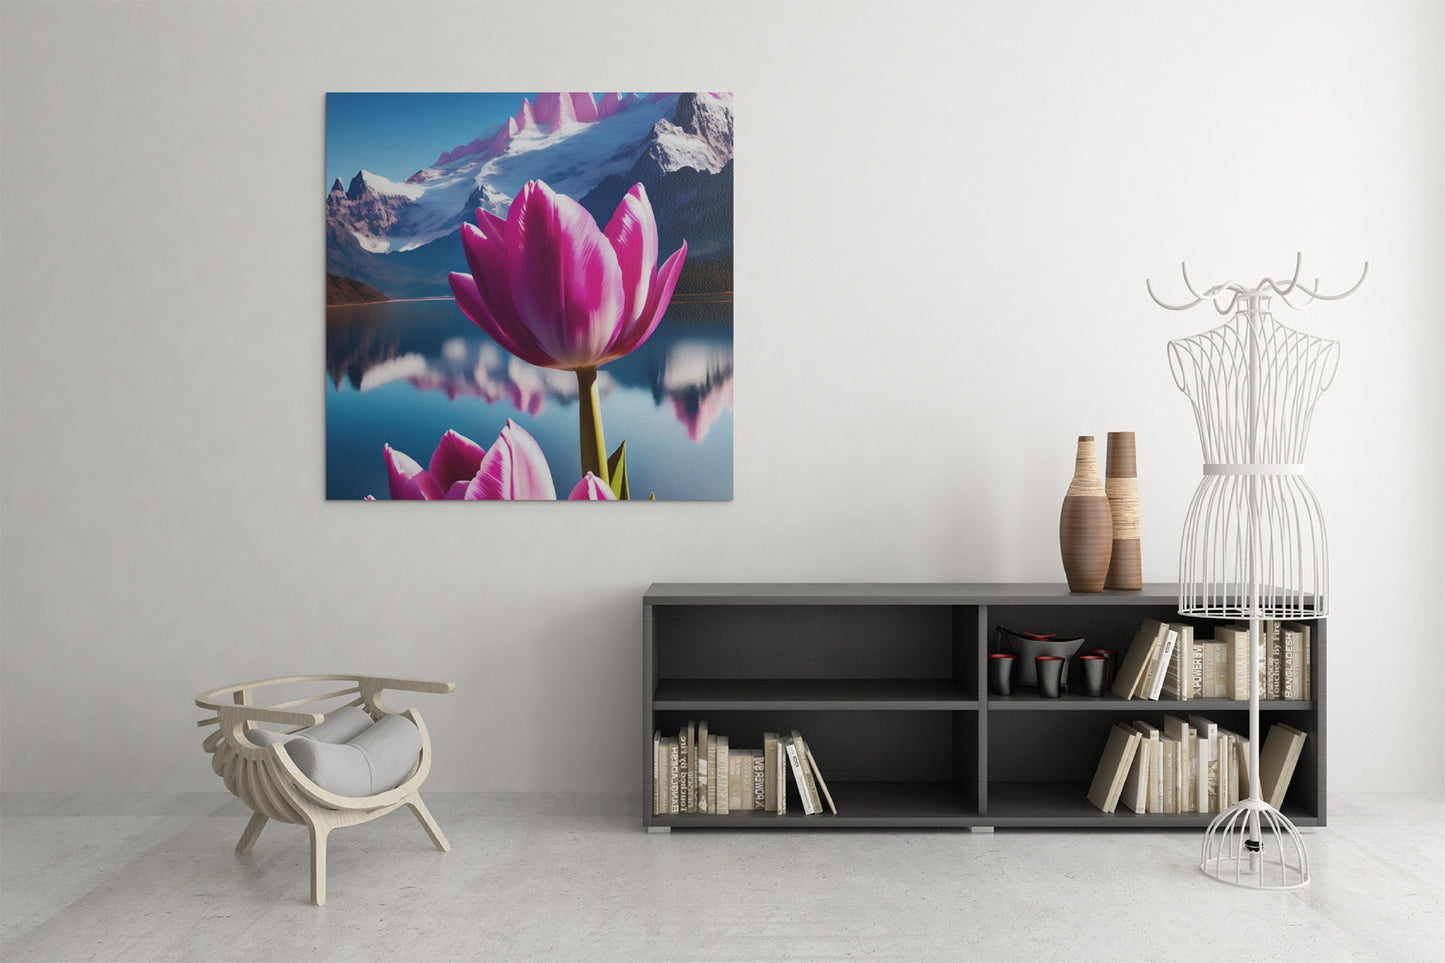 Find Cheap & Legendary Wall Art Near You! Get Oversized Plaster Tulips and Botanical Prints on Etsy.Perfect for Above the Bed or on Walls